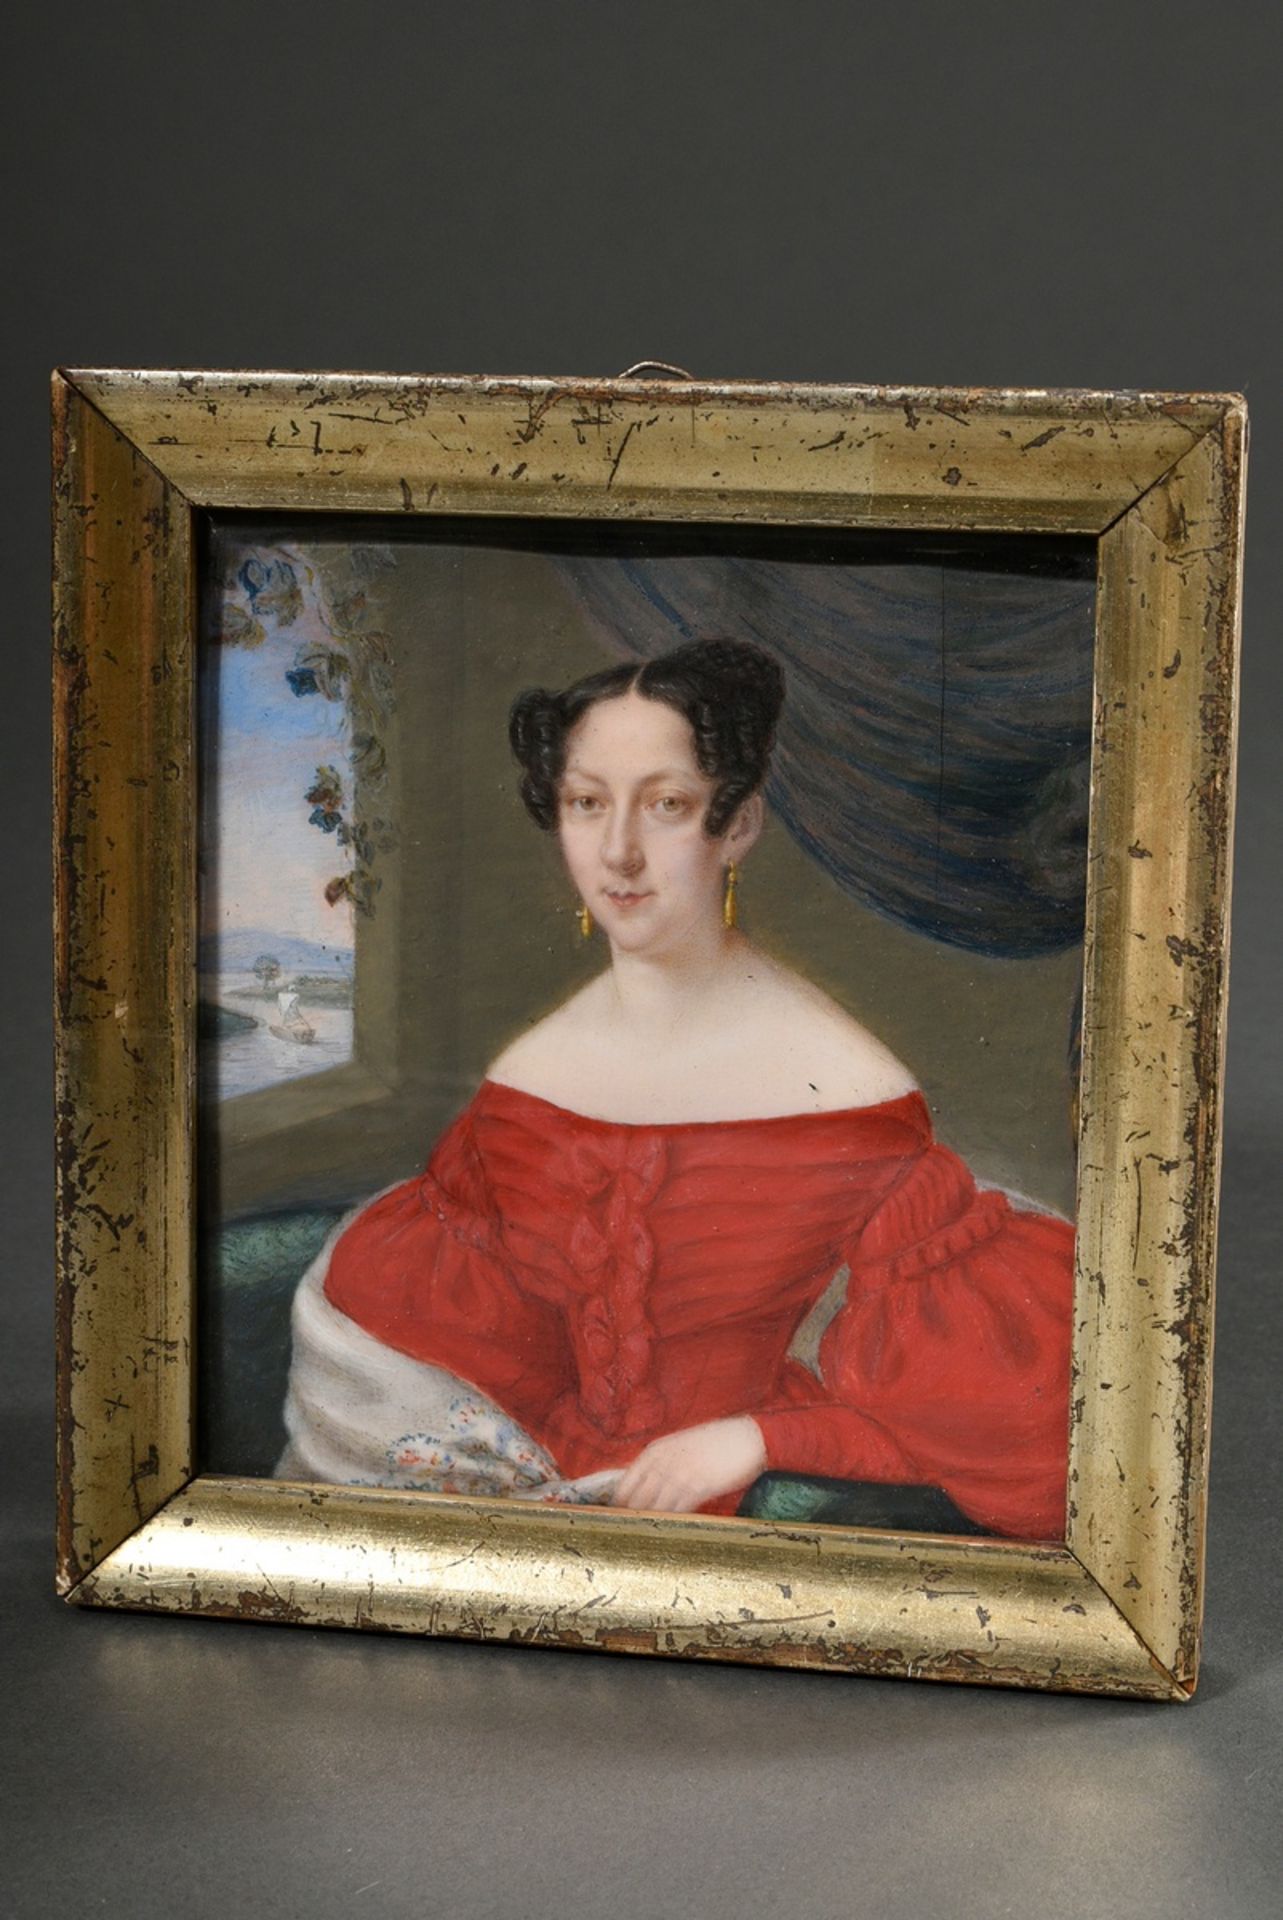 Fine Biedermeier miniature "Lady in a red dress", gouache/paper, on verso collection label "G. Ad. 